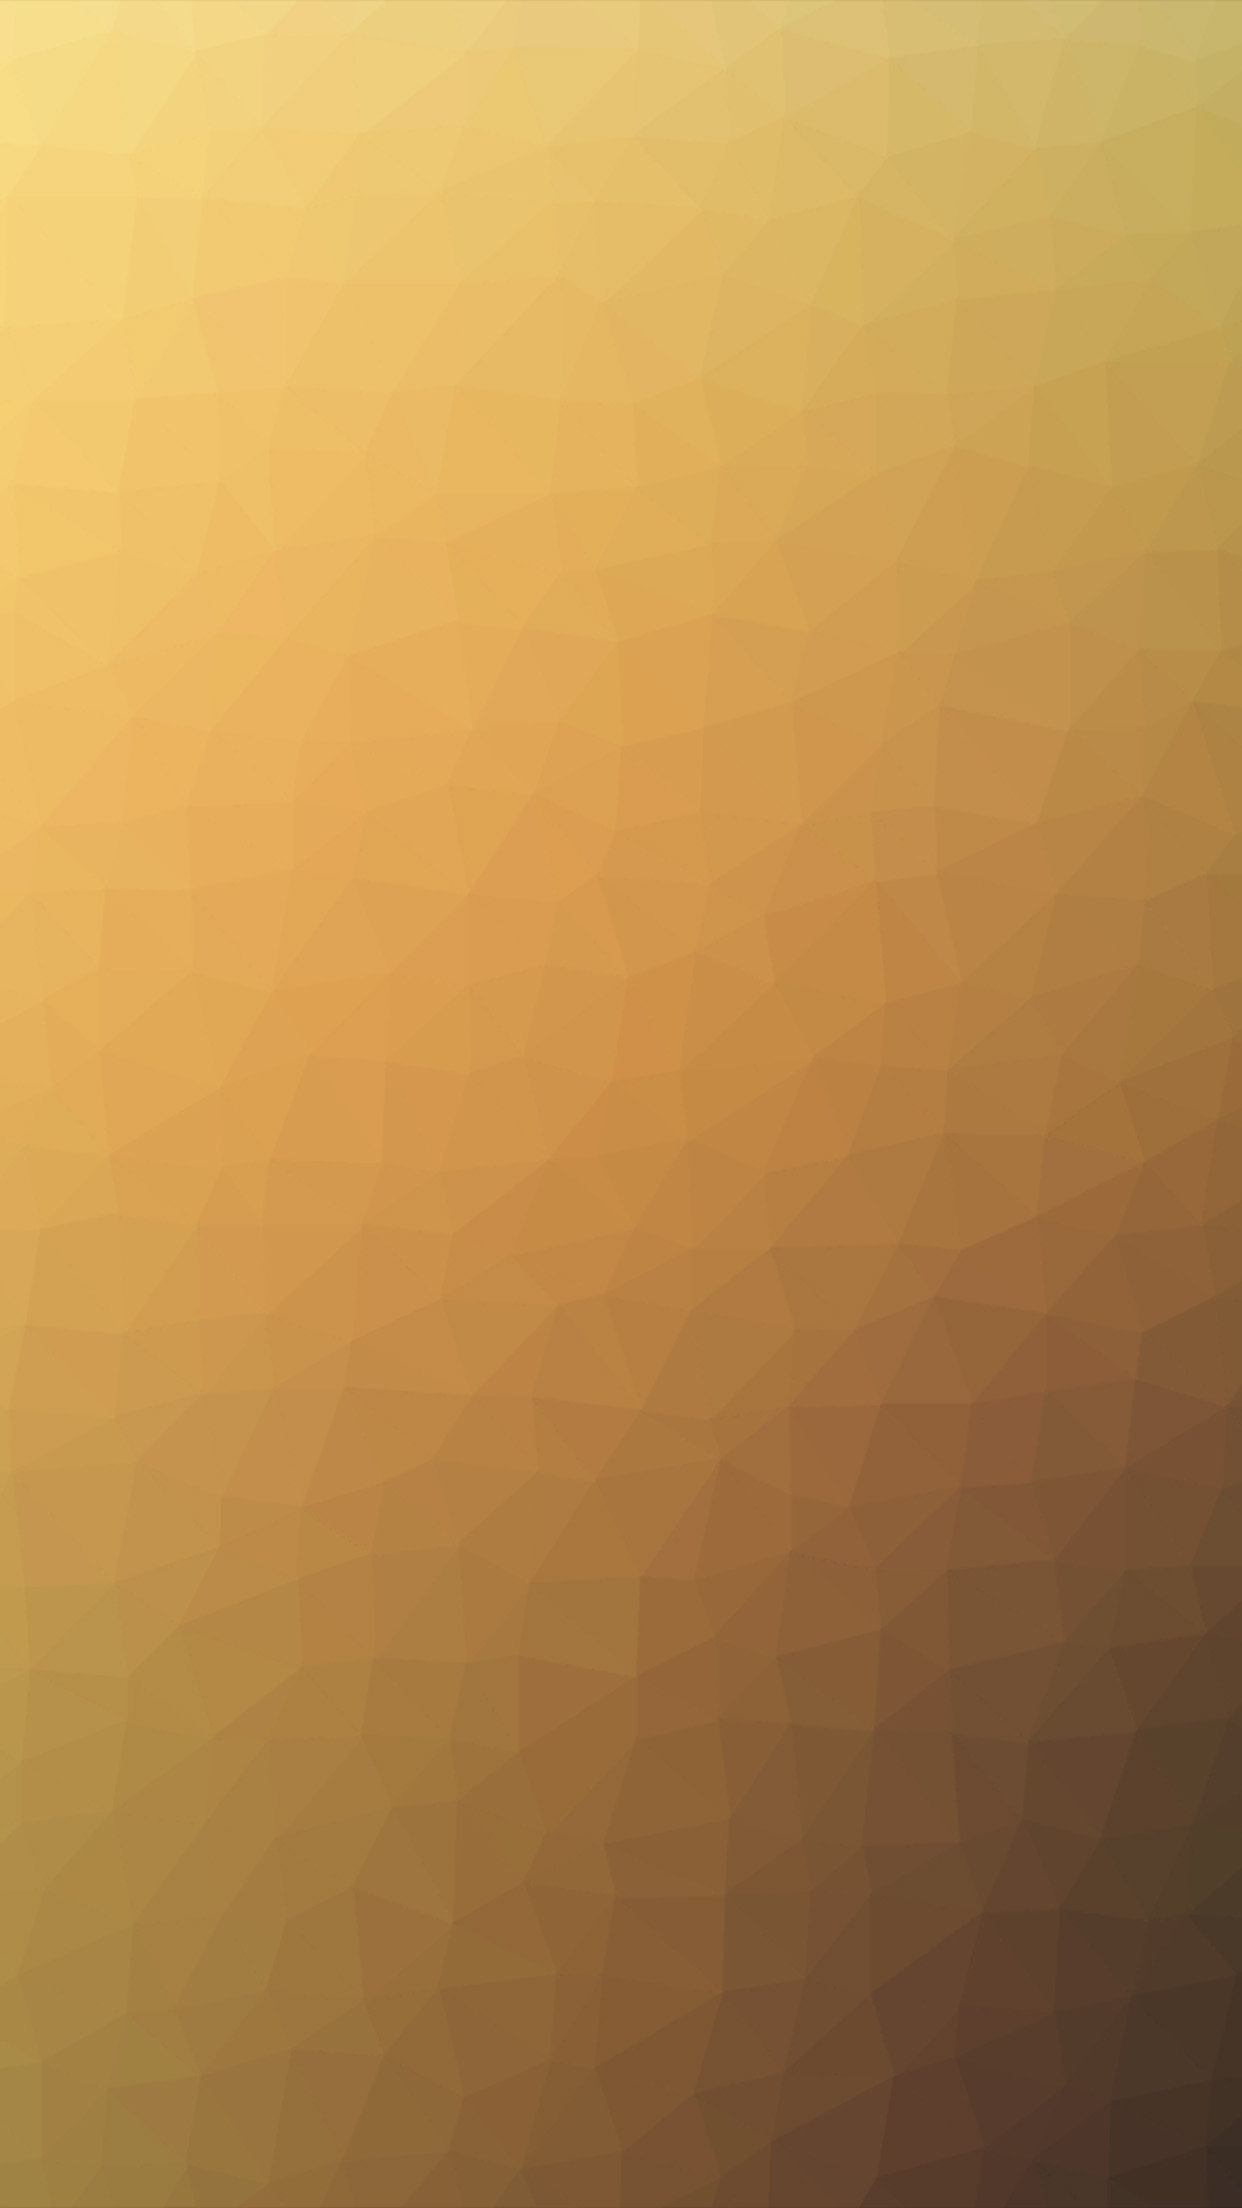 Polygon Art Yellow Abstract Pattern Android wallpaper